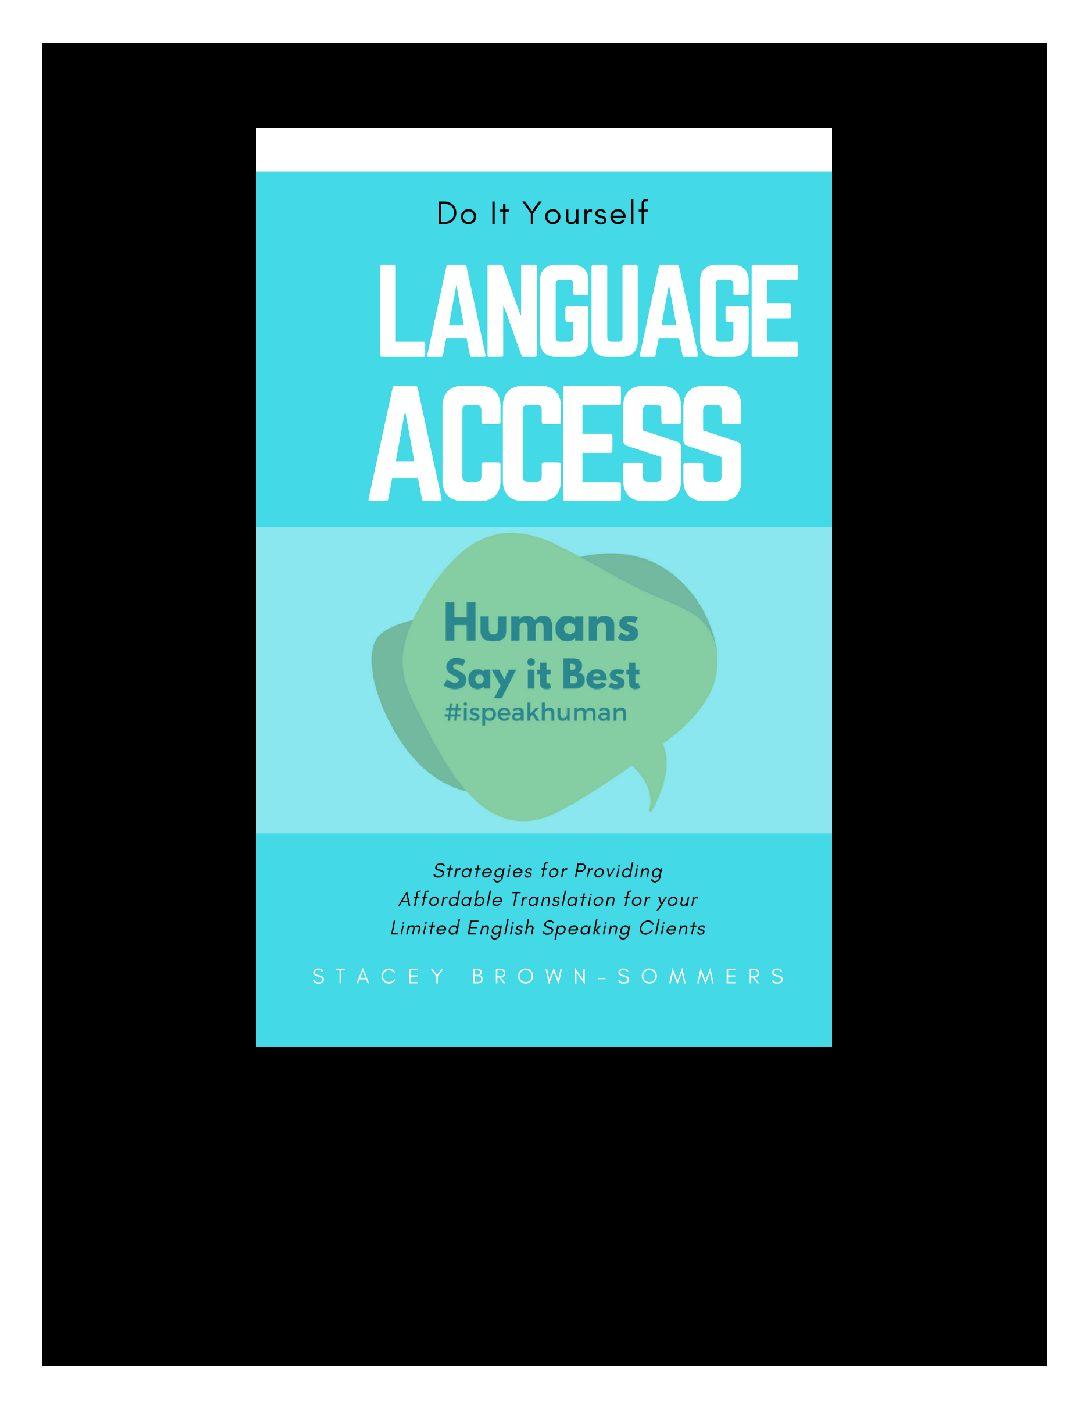 Do it Yourself Language Access